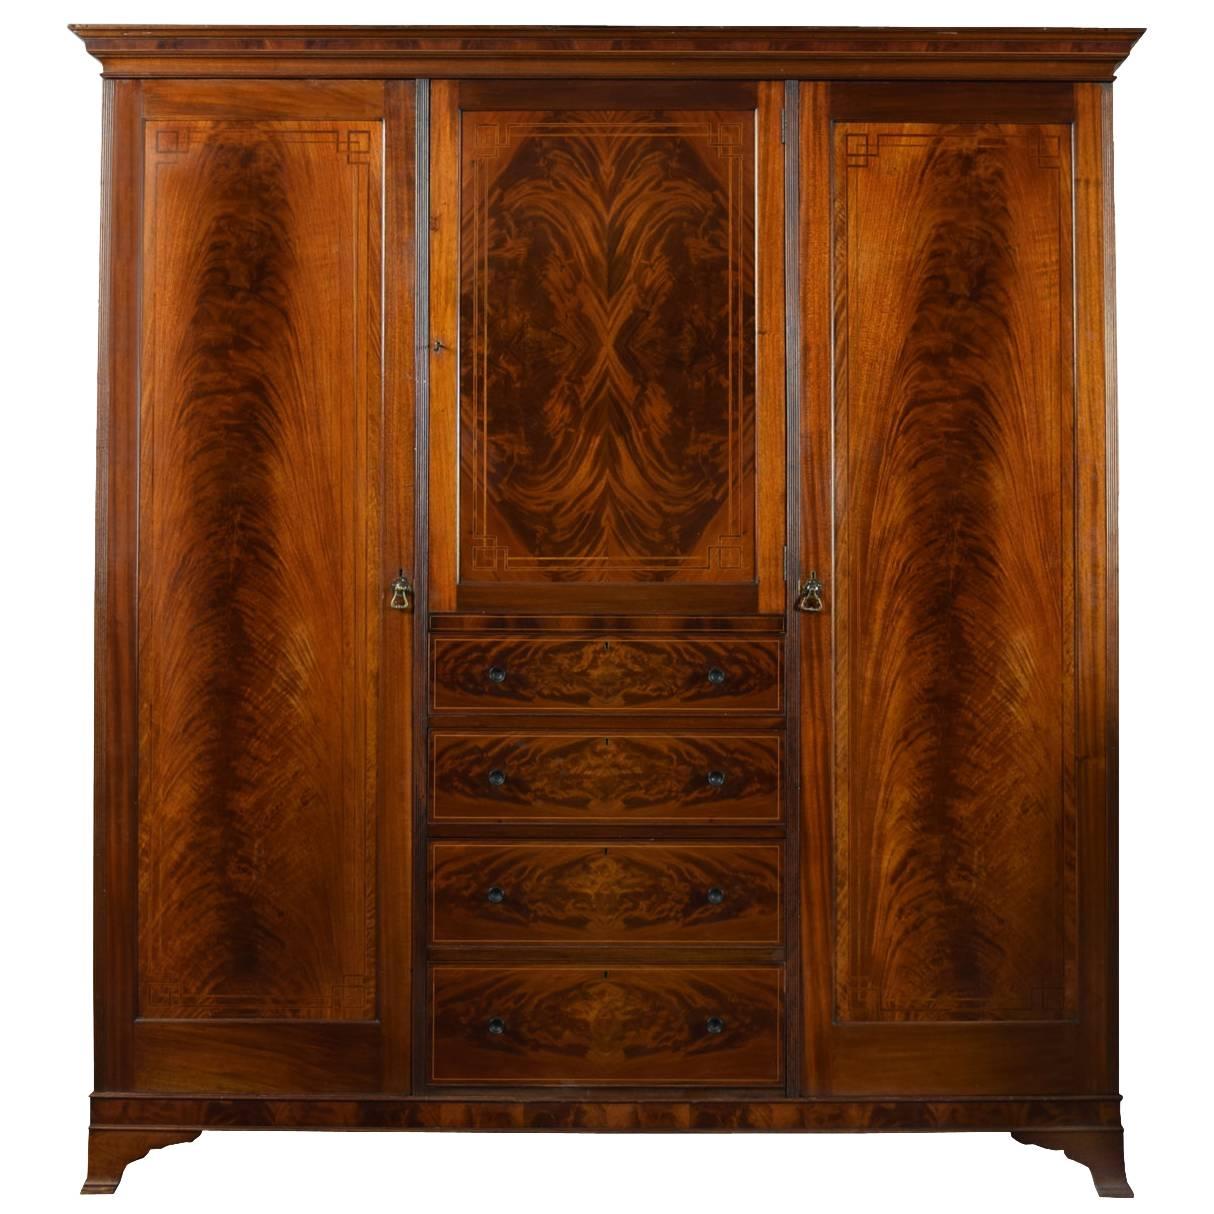 Late 19th Century Flame Mahogany Compactum Wardrobe by Maple & Co